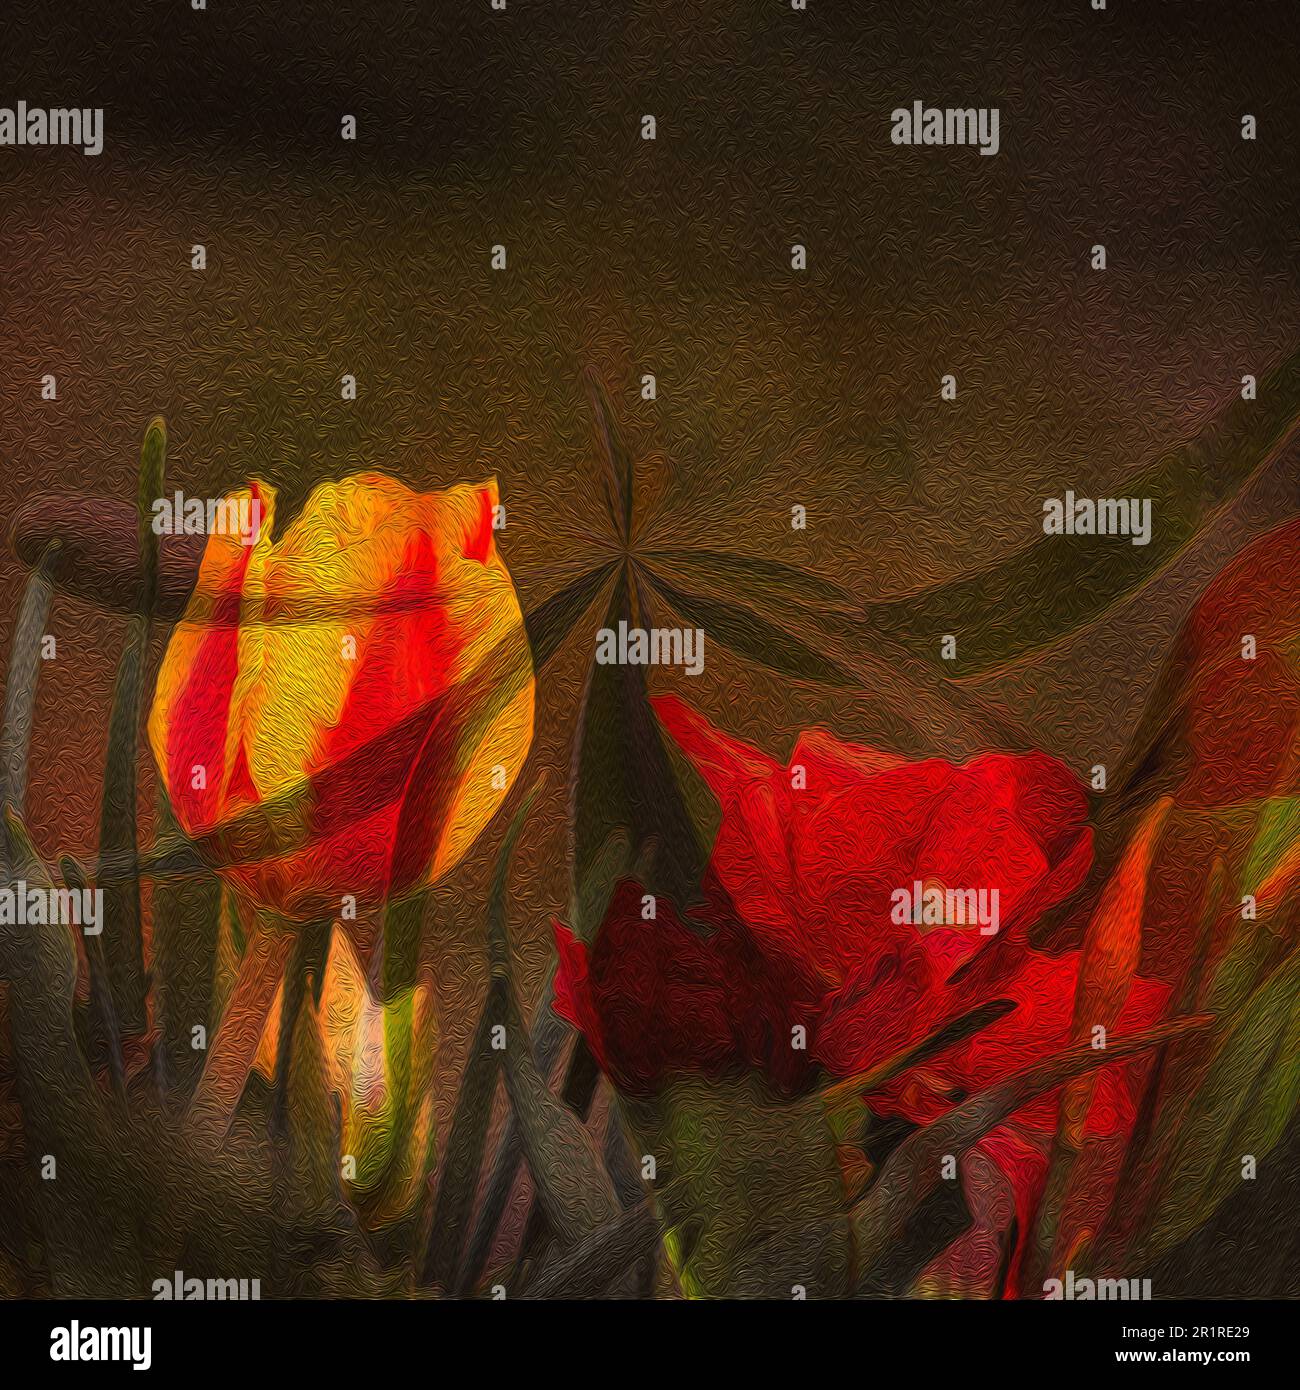 DIGITAL PAINTING : TWO COLORED TULIP Stock Photo